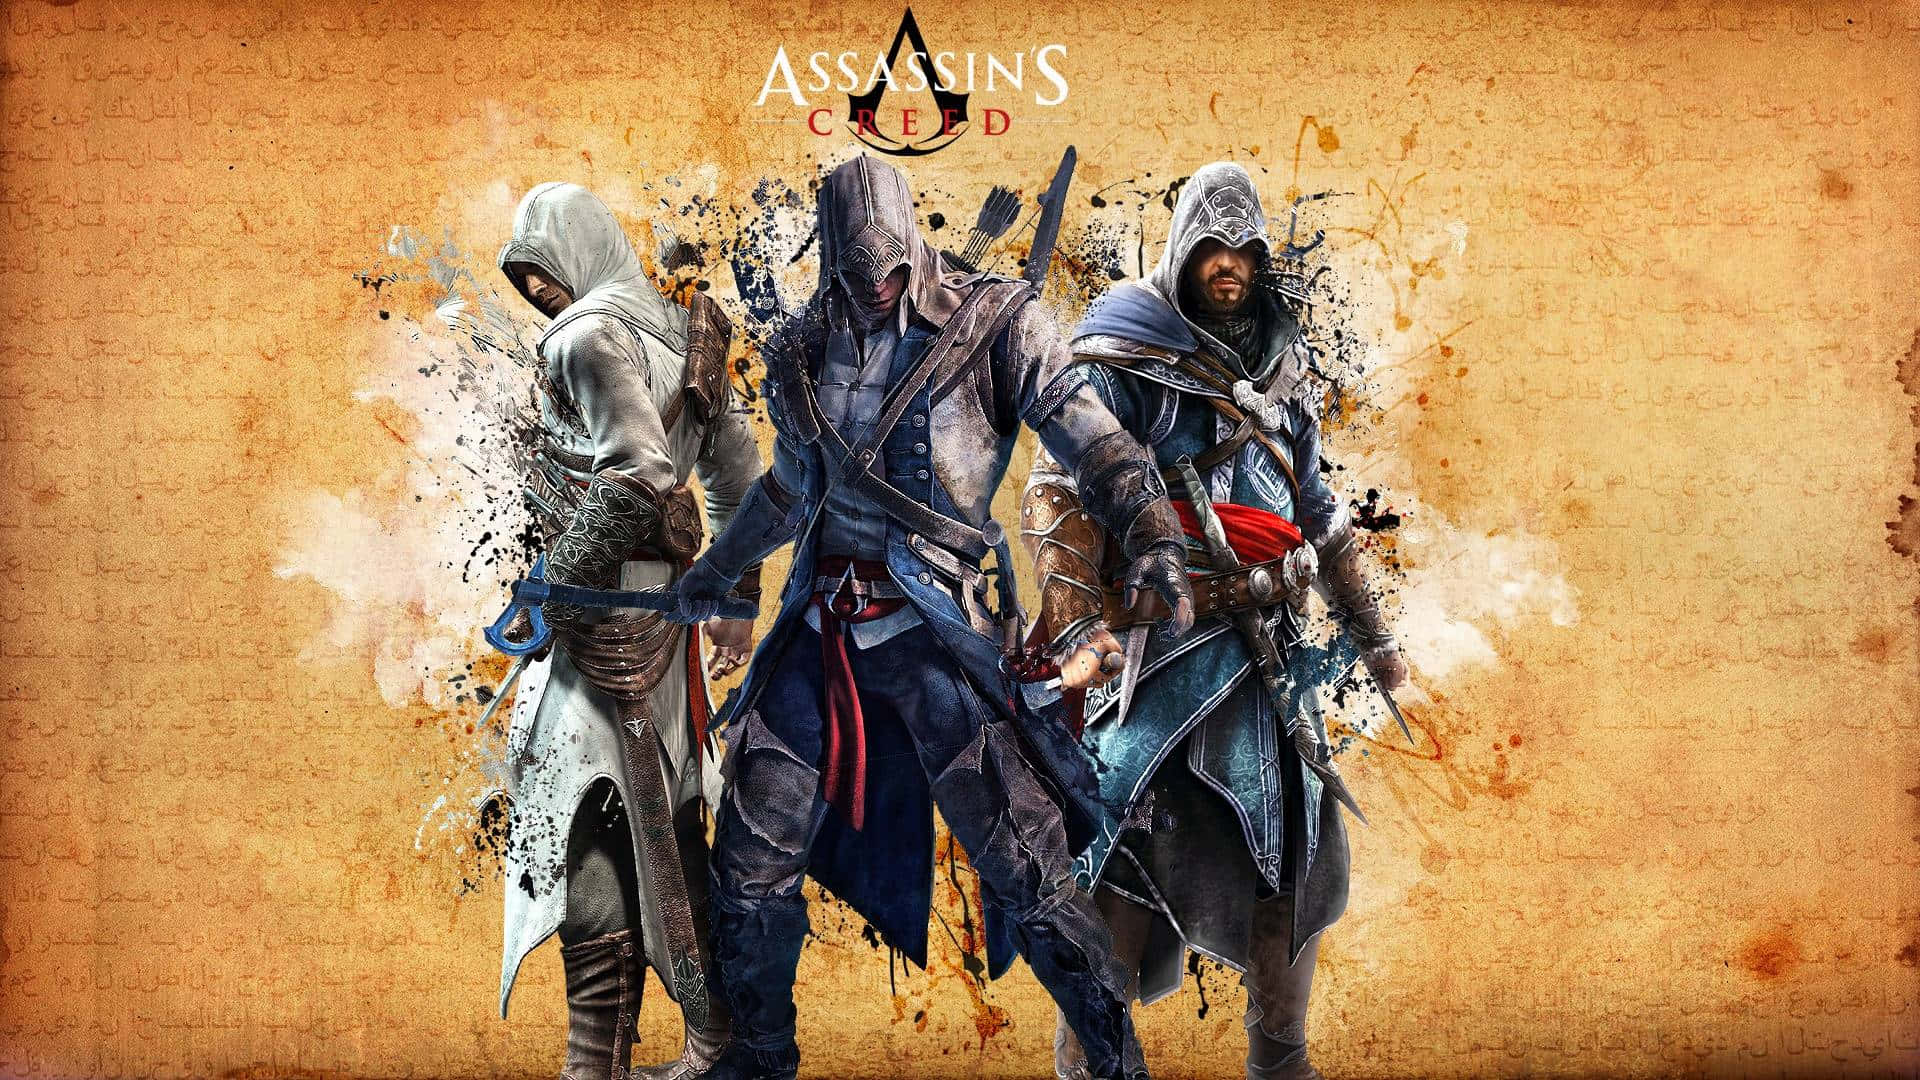 Hdvideo Game Assassin's Creed - width=